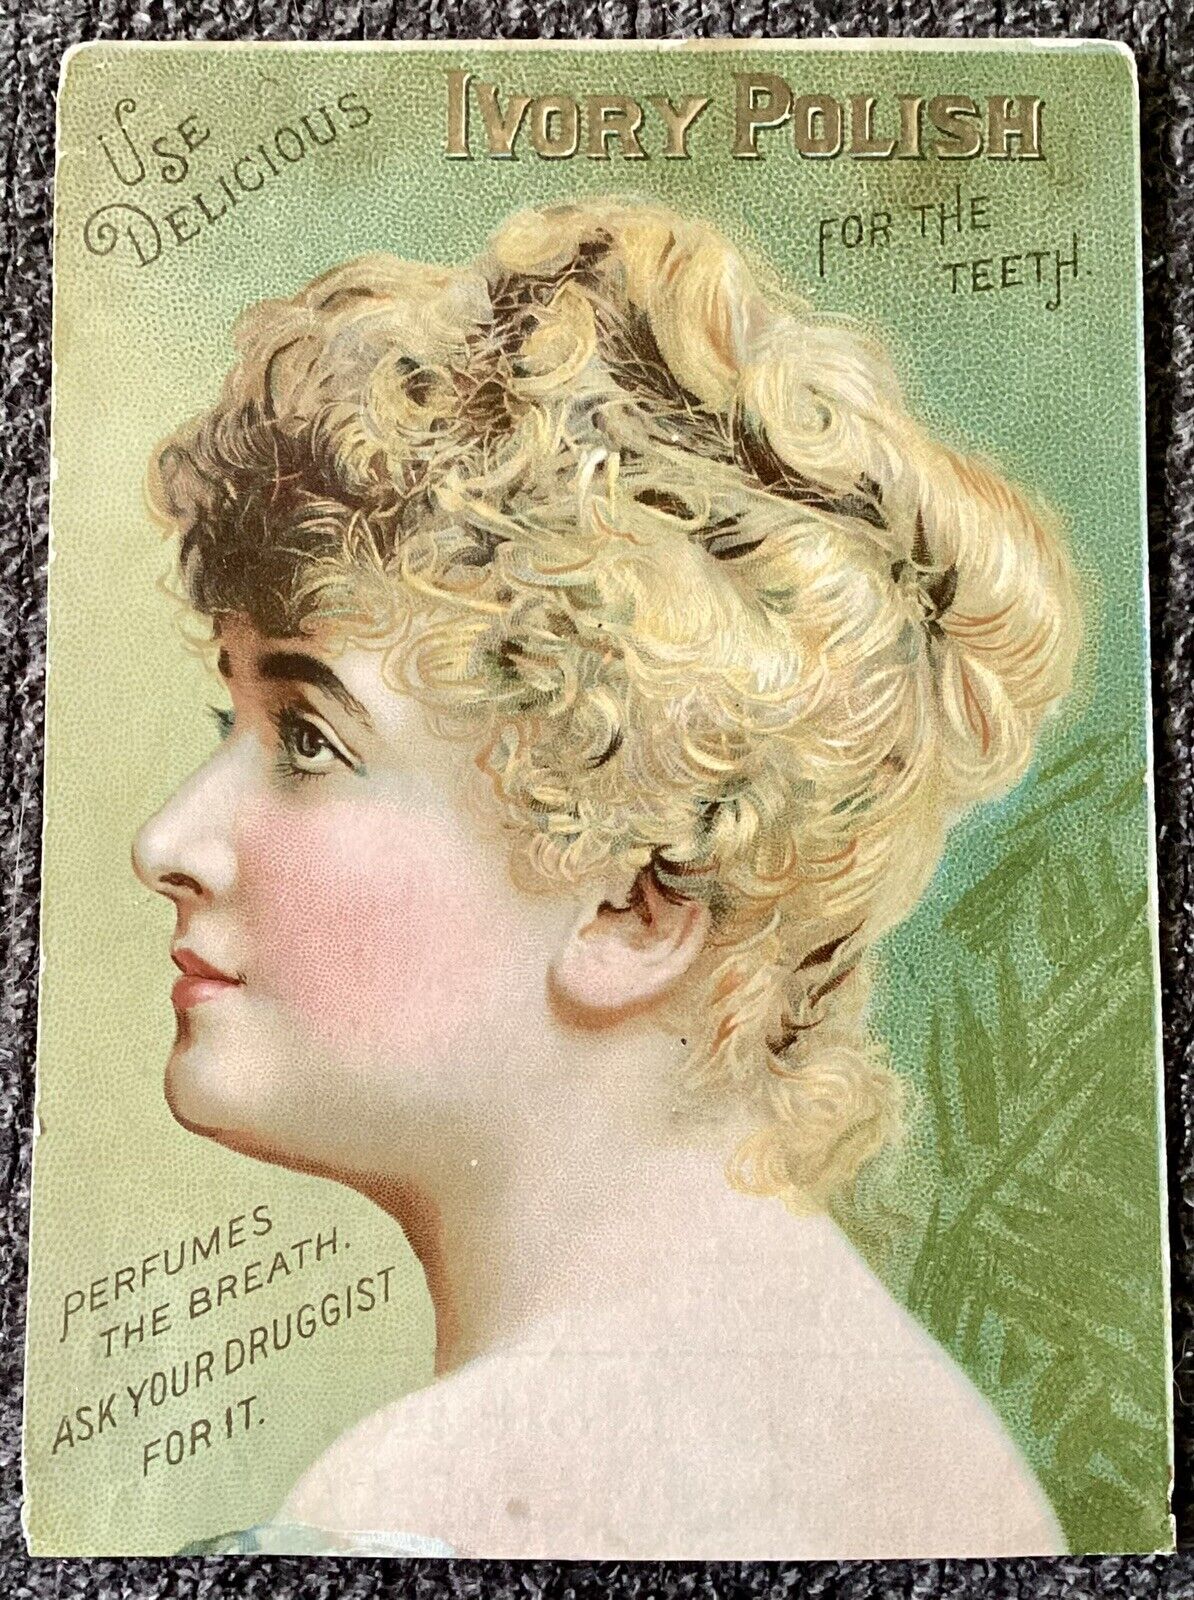 Victorian Trade Card, IVORY POLISH FOR THE TEETH, Fleming Bros., Pittsburg PA